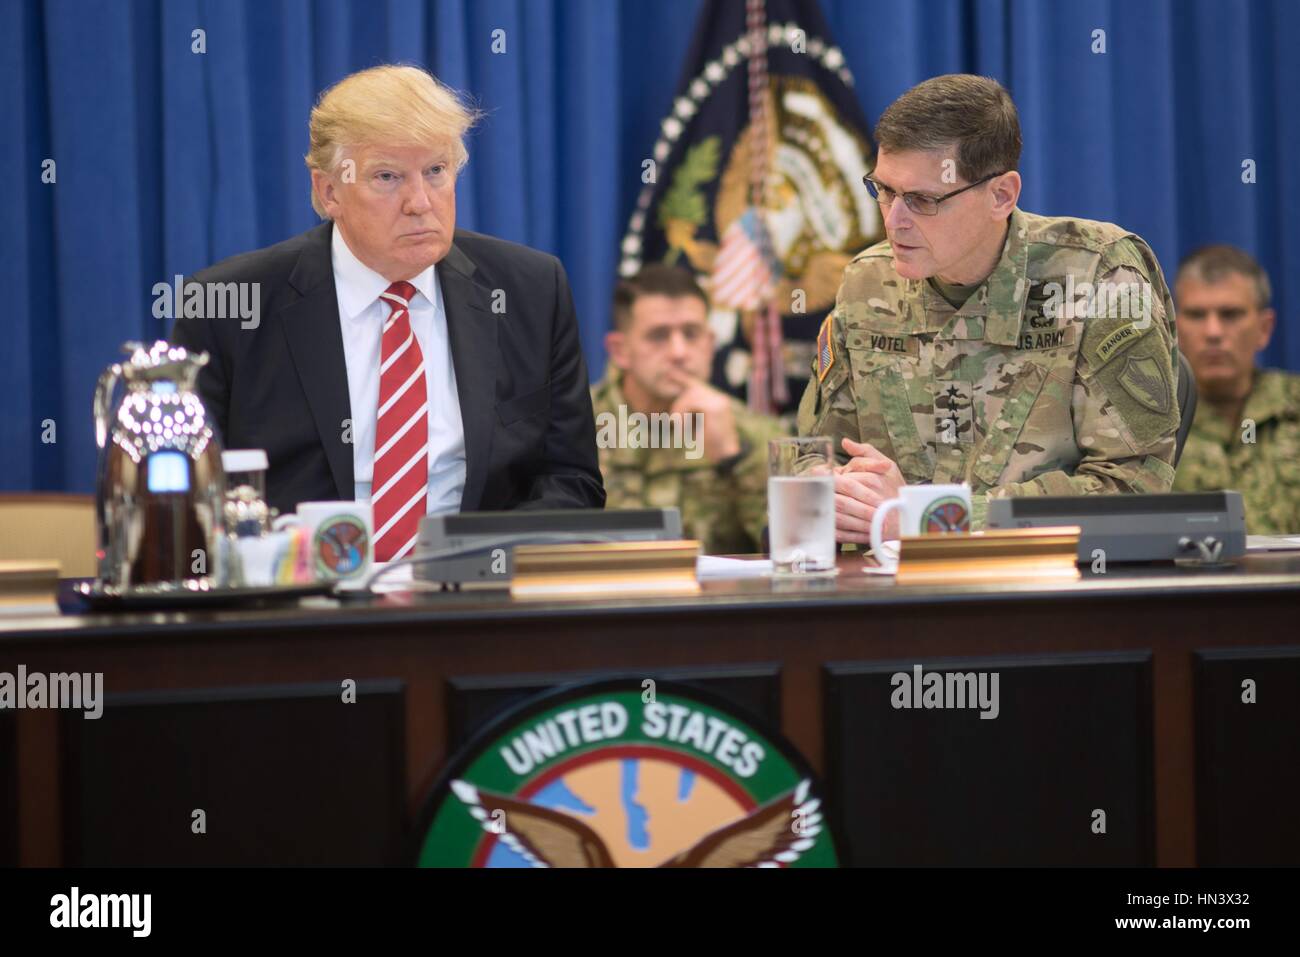 U.S President Donald Trump listens as Gen. Joseph Votel, commander of U.S. Central Command, provides a briefing of current military operations during a visit to U.S. Central Command at MacDill Air Force Base February 6, 2017 in Tampa, Florida. Credit: Planetpix/Alamy Live News Stock Photo